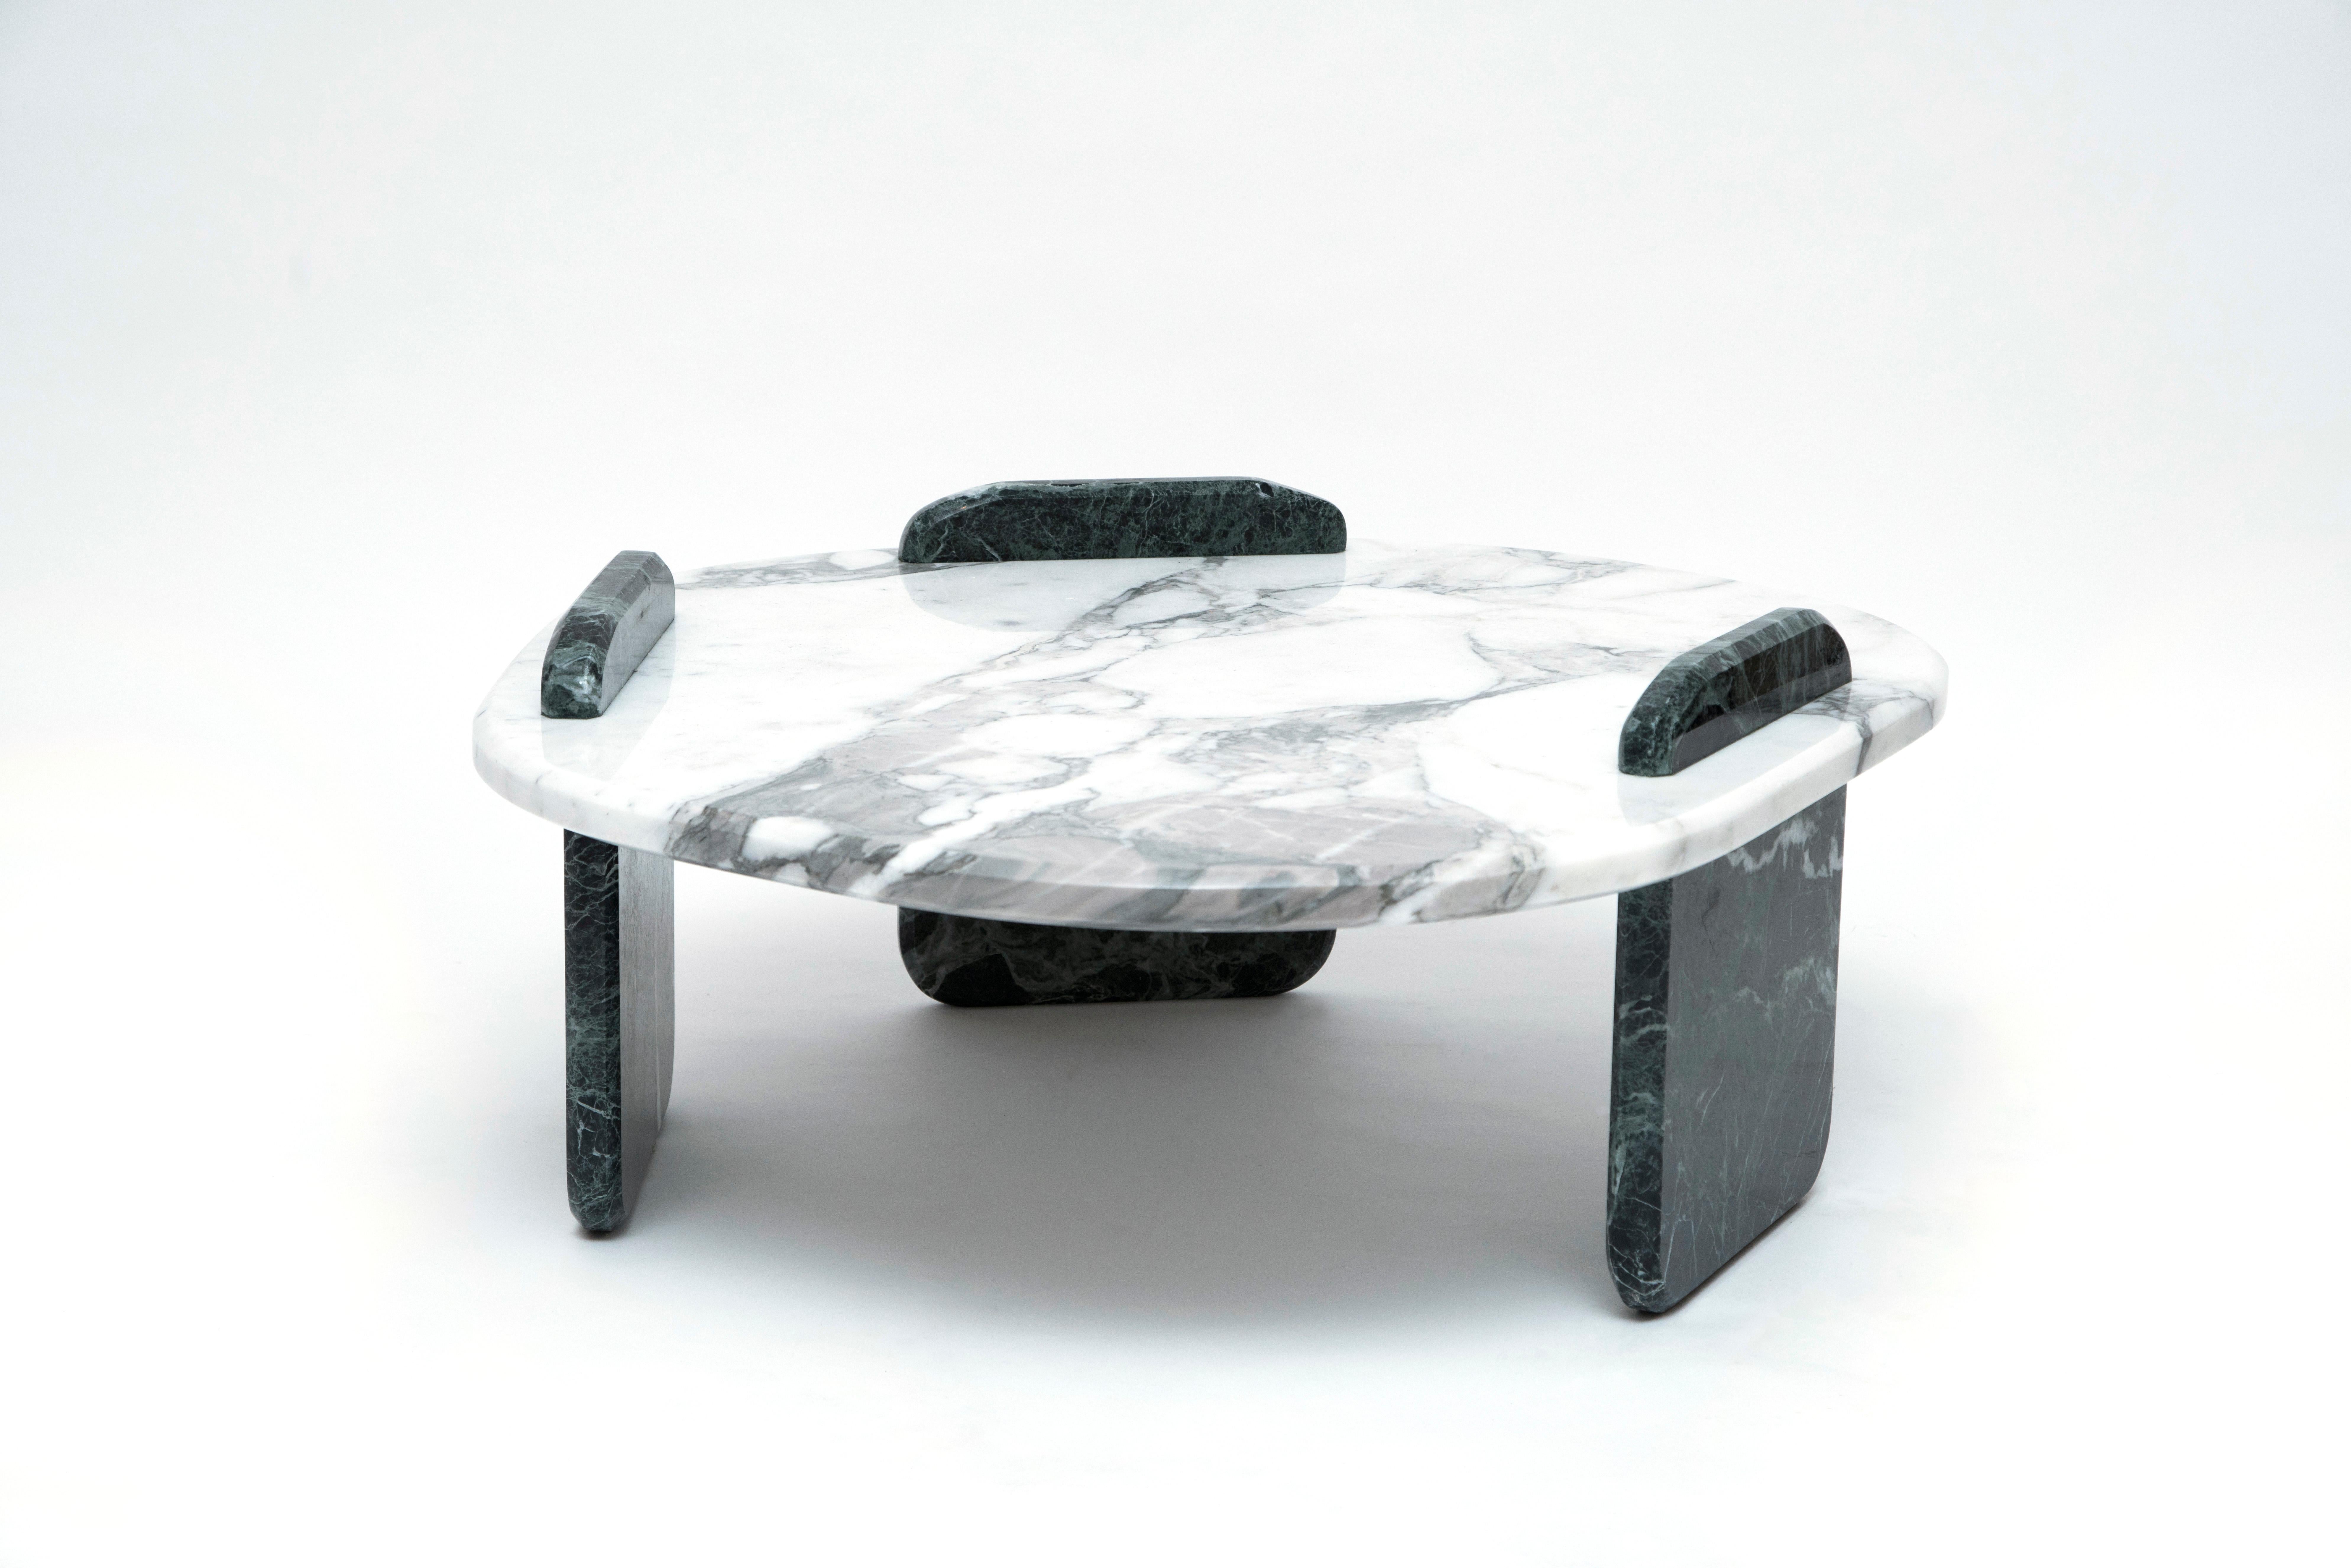 M-Table by Thomas Trad.
2018
Dimensions: L 90 x W 80 x H 30 cm.
Materials: Arabescato marble top, Tinos green legs.

Marble coffee table.

Thomas Trad is a product designer from Beirut. An alumnus of London's prestigious Central Saint